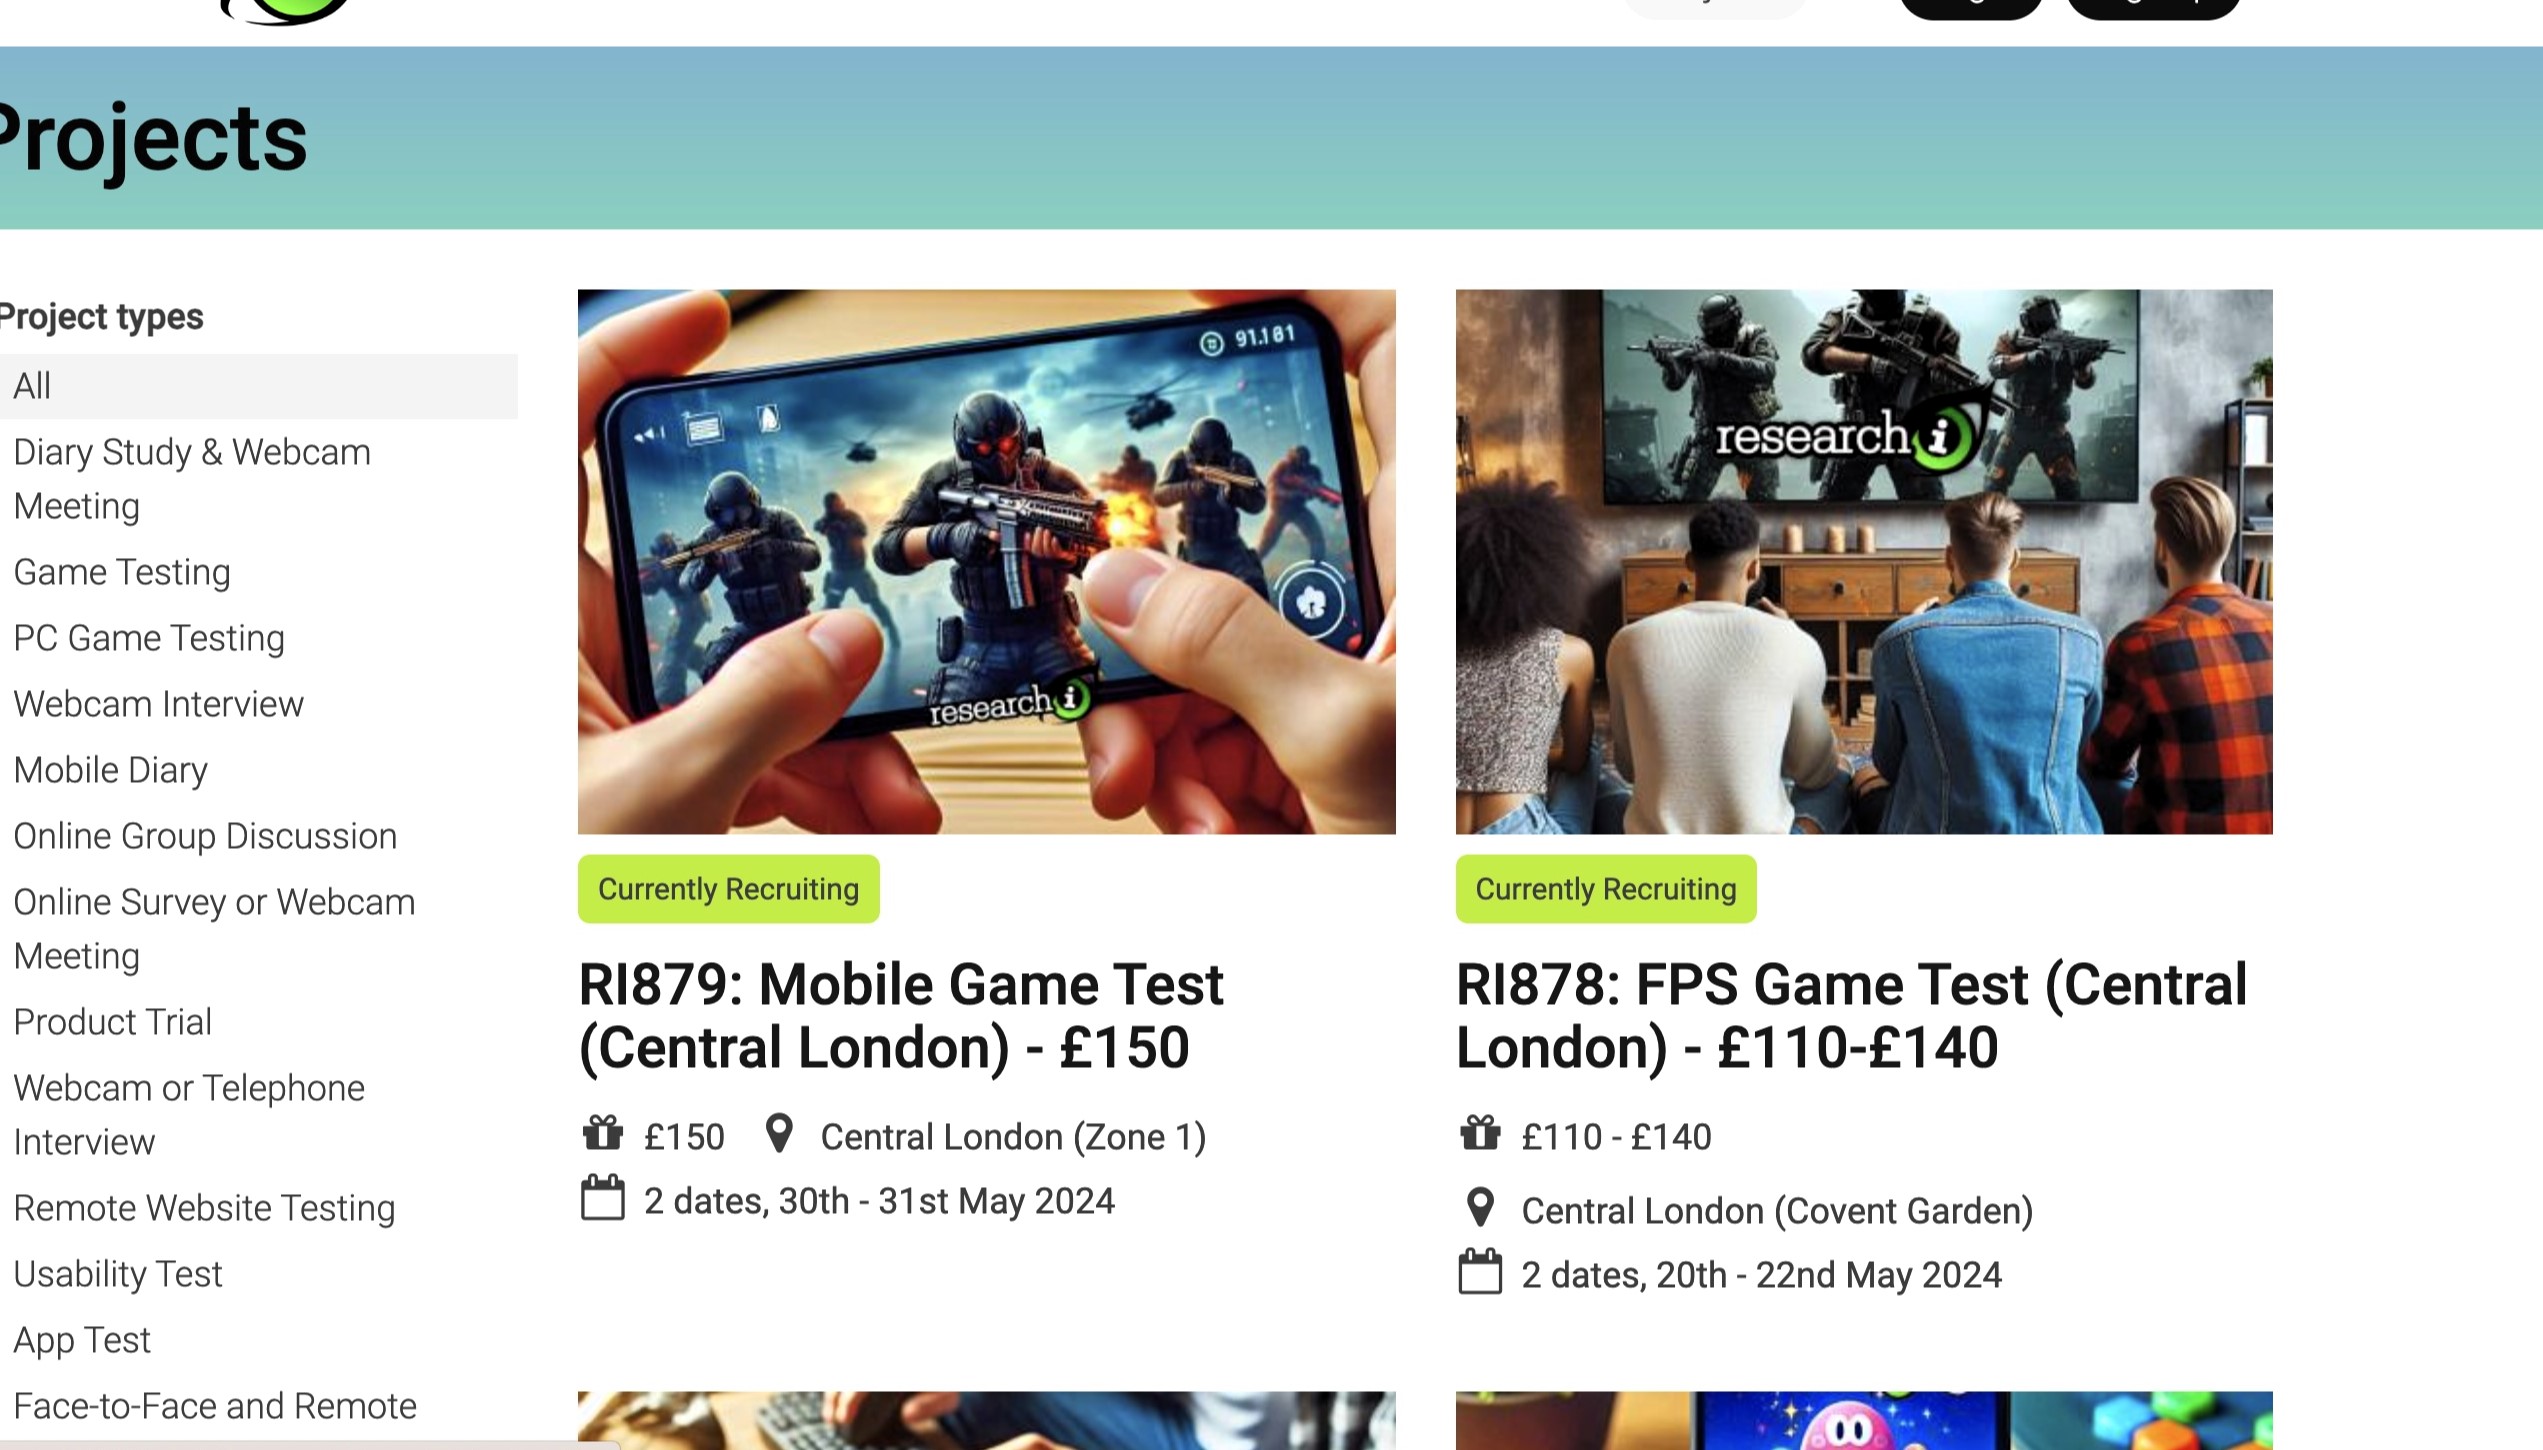 Get paid to play the latest computer games! Research-i seeks gamers to test upcoming releases, earning up to £700. From casual to hardcore, all are welcome to register and enjoy paid market research projects from home or in London.